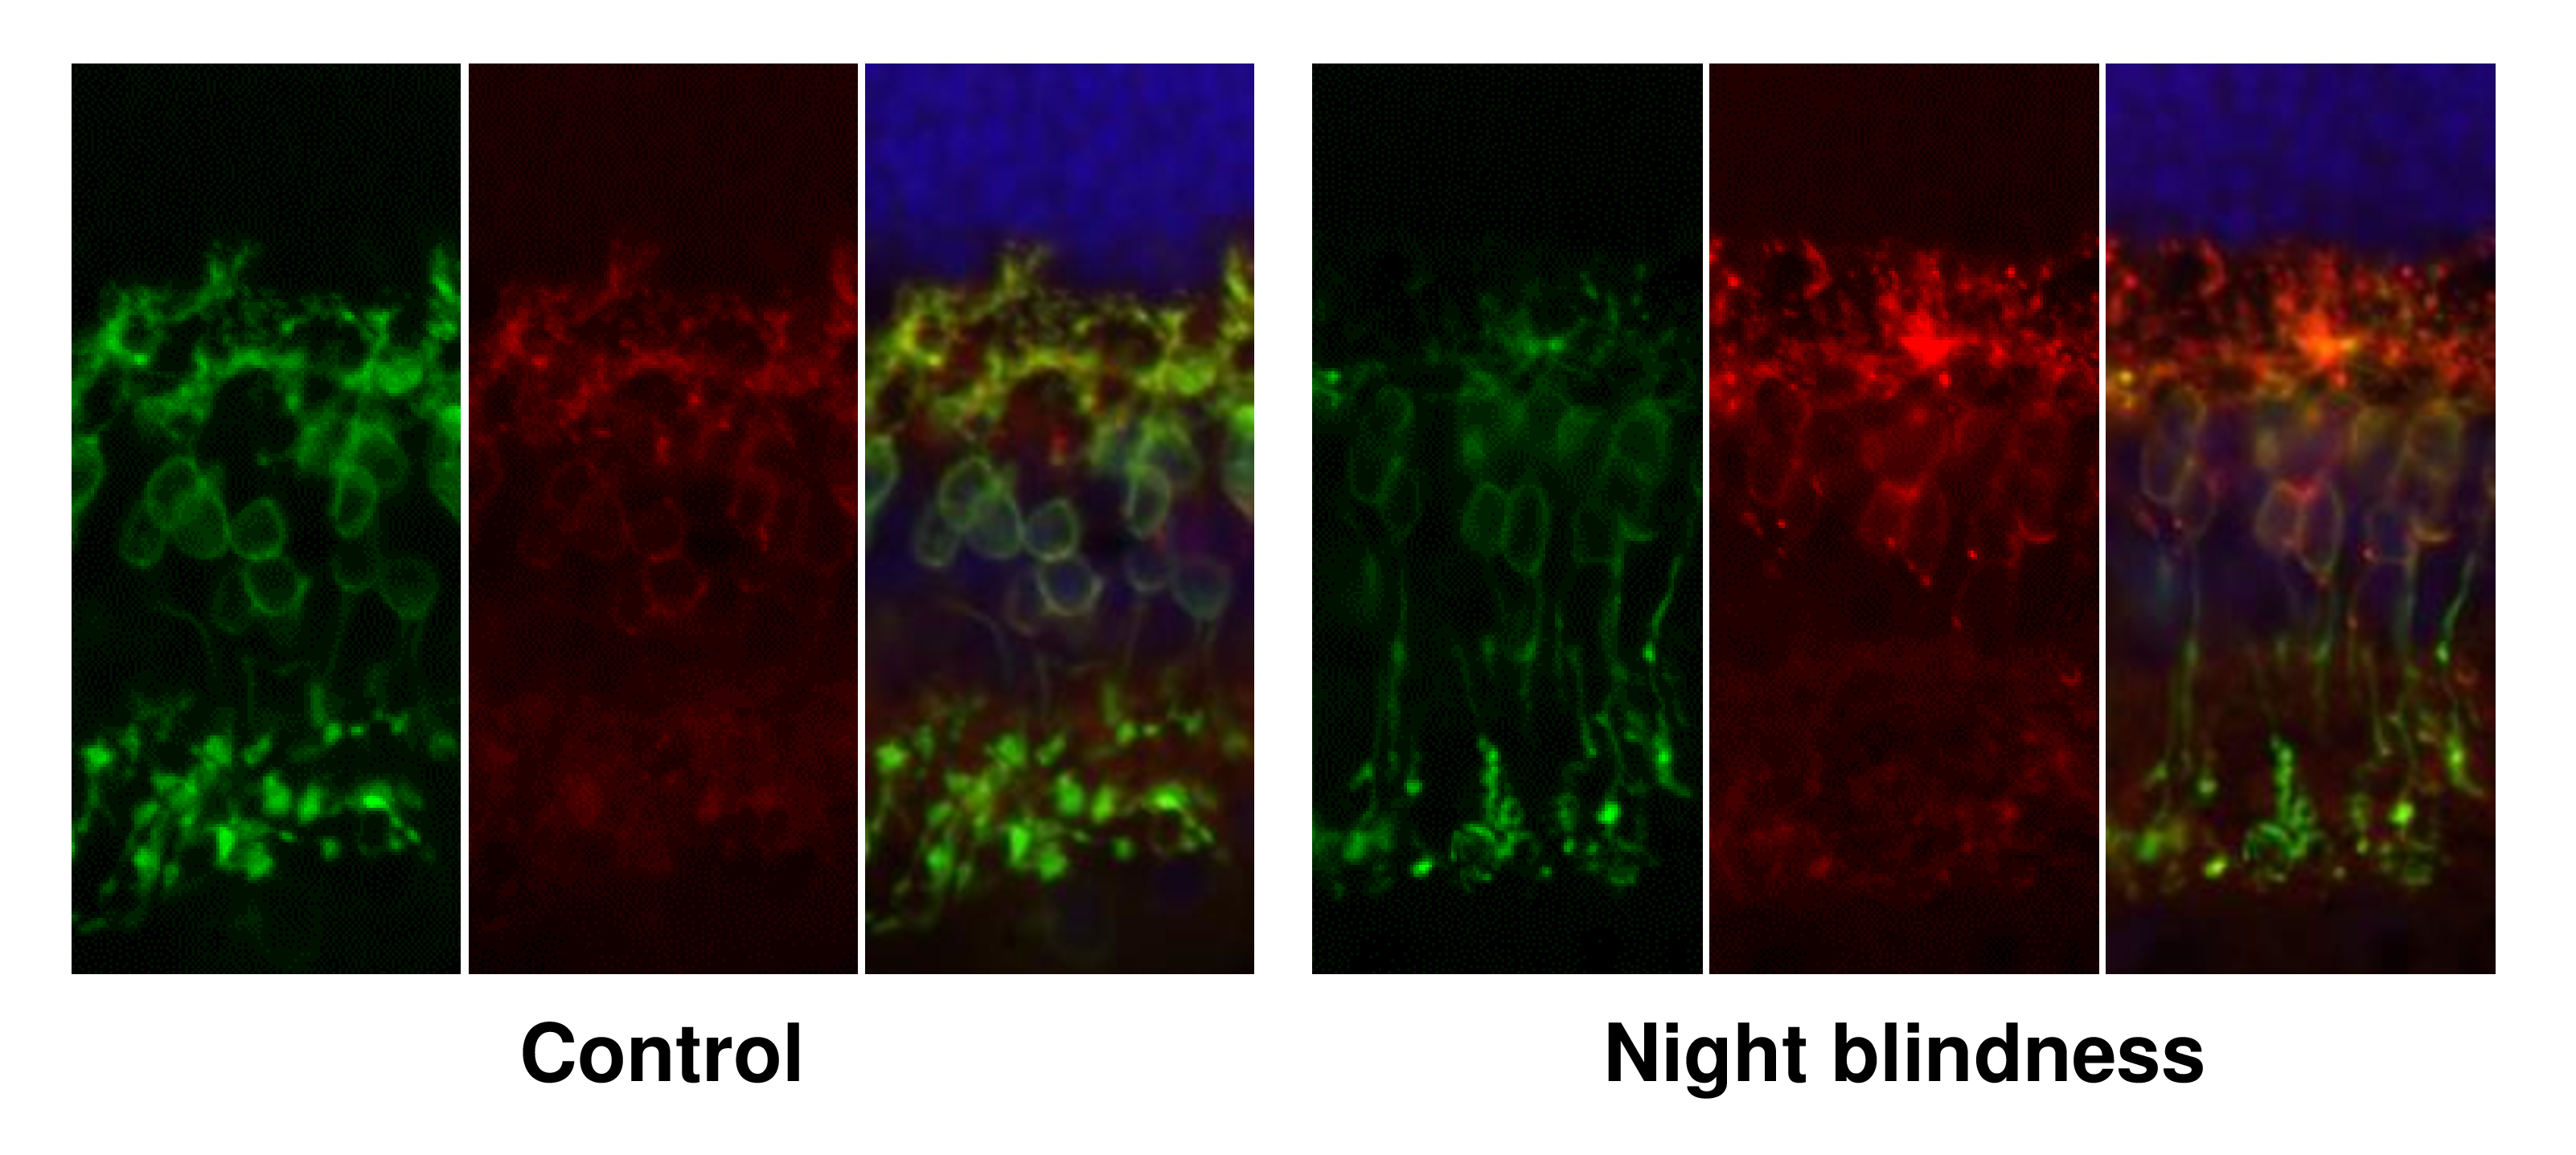 Six panels, three labeled "control" and three labeled "nightblindness" show fluorescent-labeled cells in different colors.